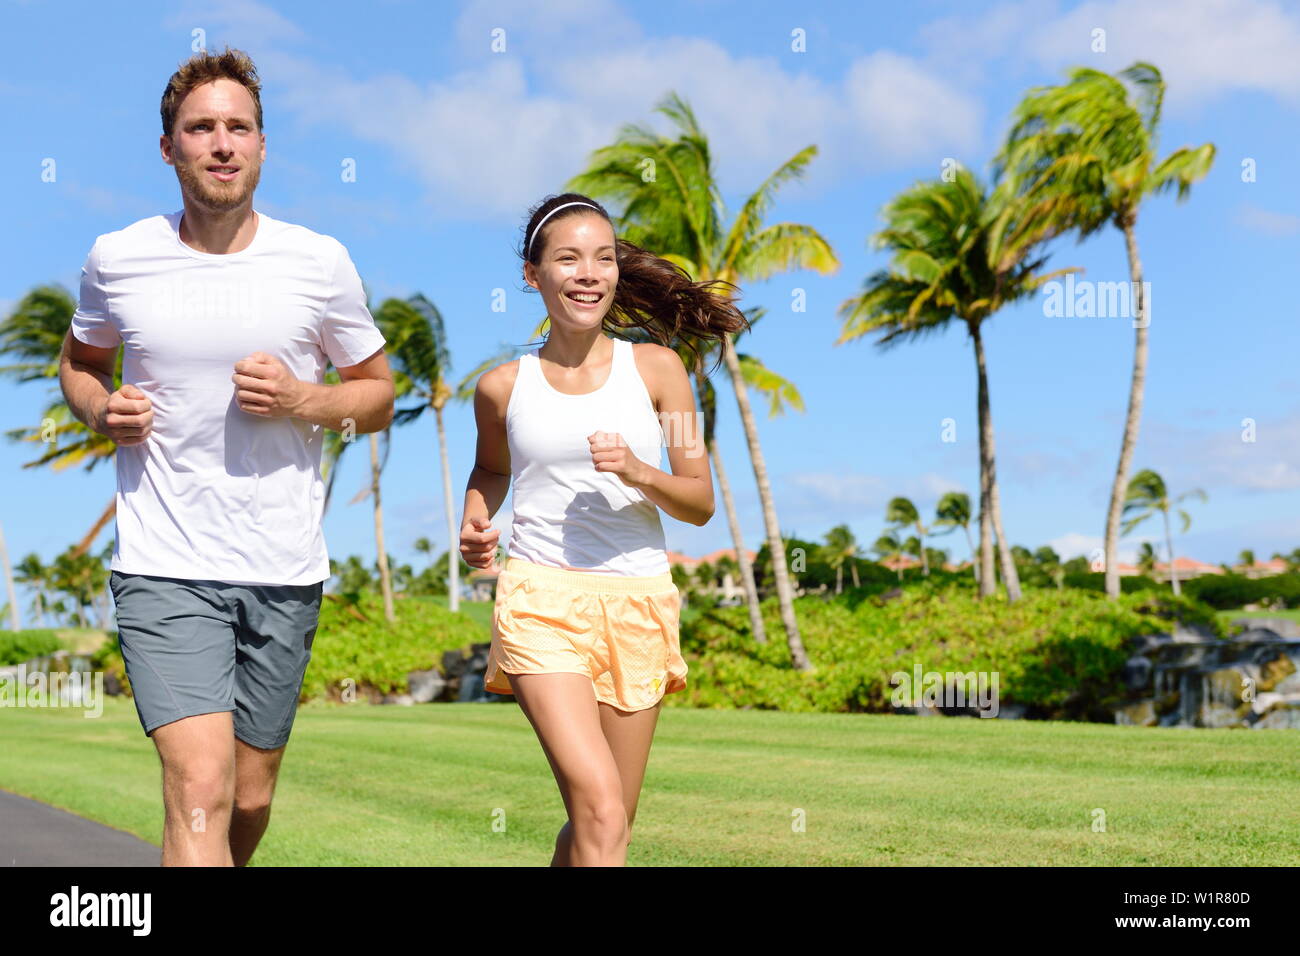 People running in city park. Happy young couple living an active healthy lifestyle  jogging training their cardio during summer on road or neighborhood street.  Multiracial group, Asian and Caucasian Stock Photo -